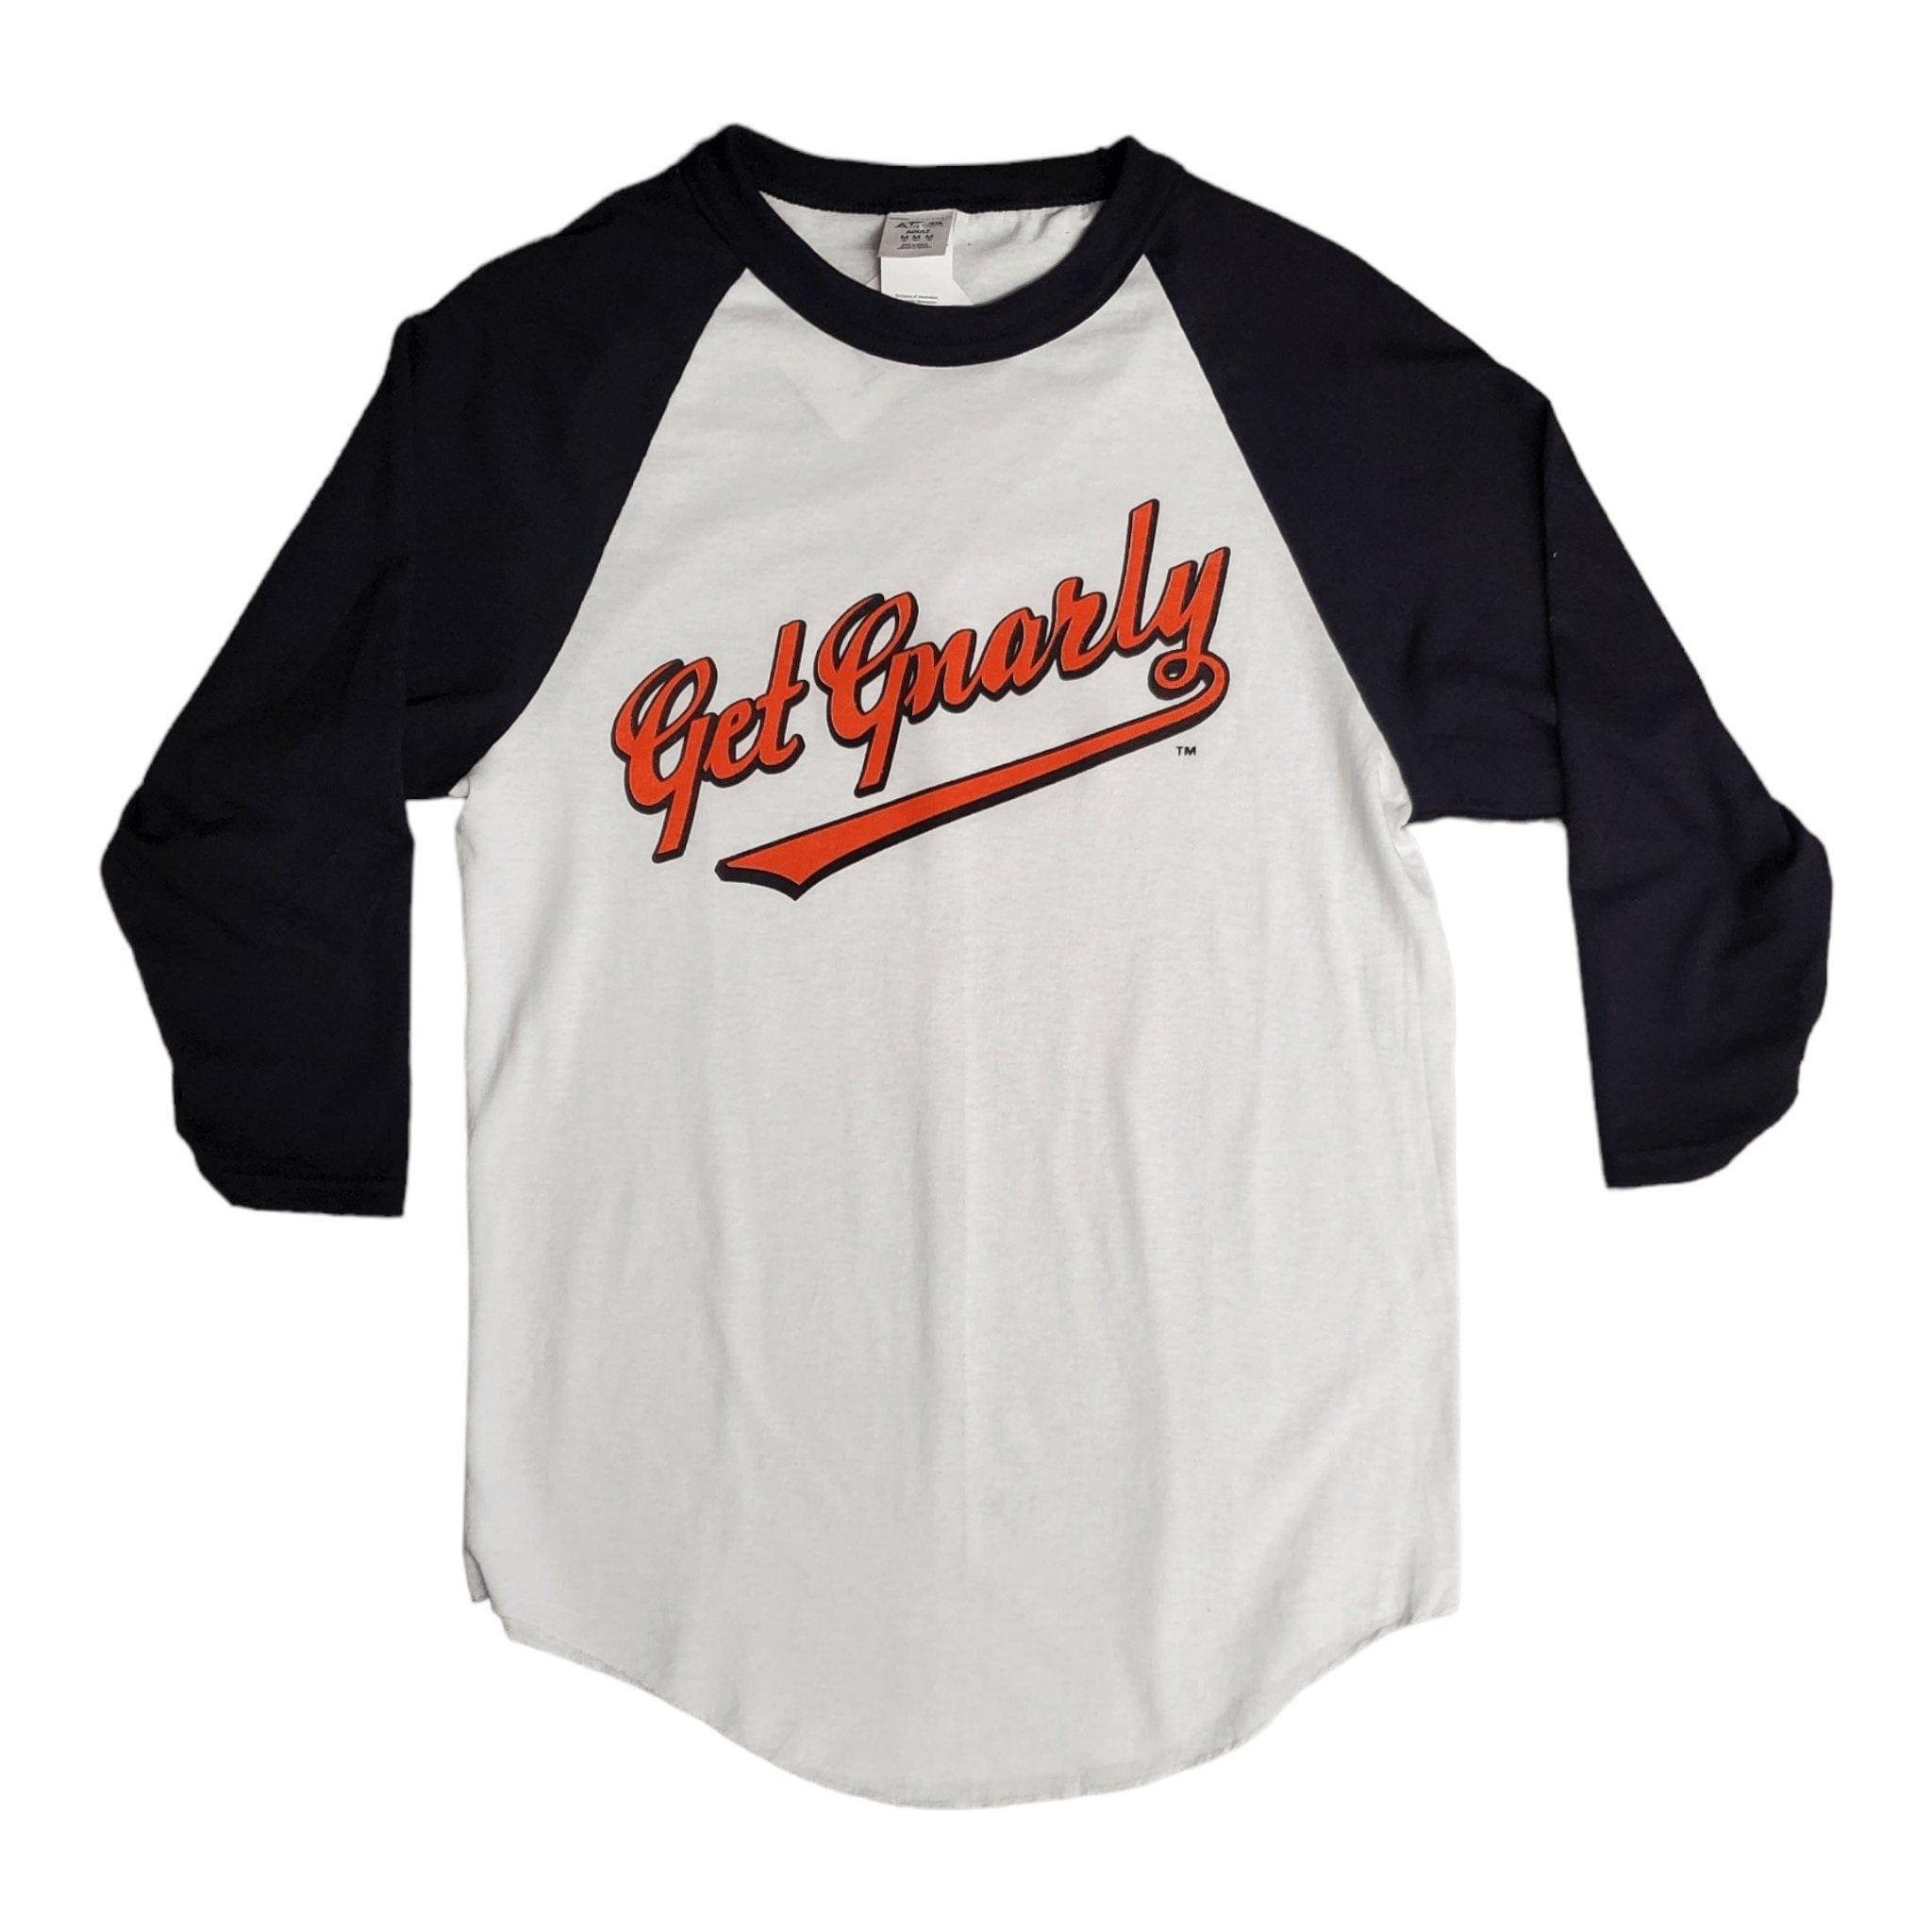 Gnarball Jersey Baseball Tee-T-Shirts-Get Gnarly 